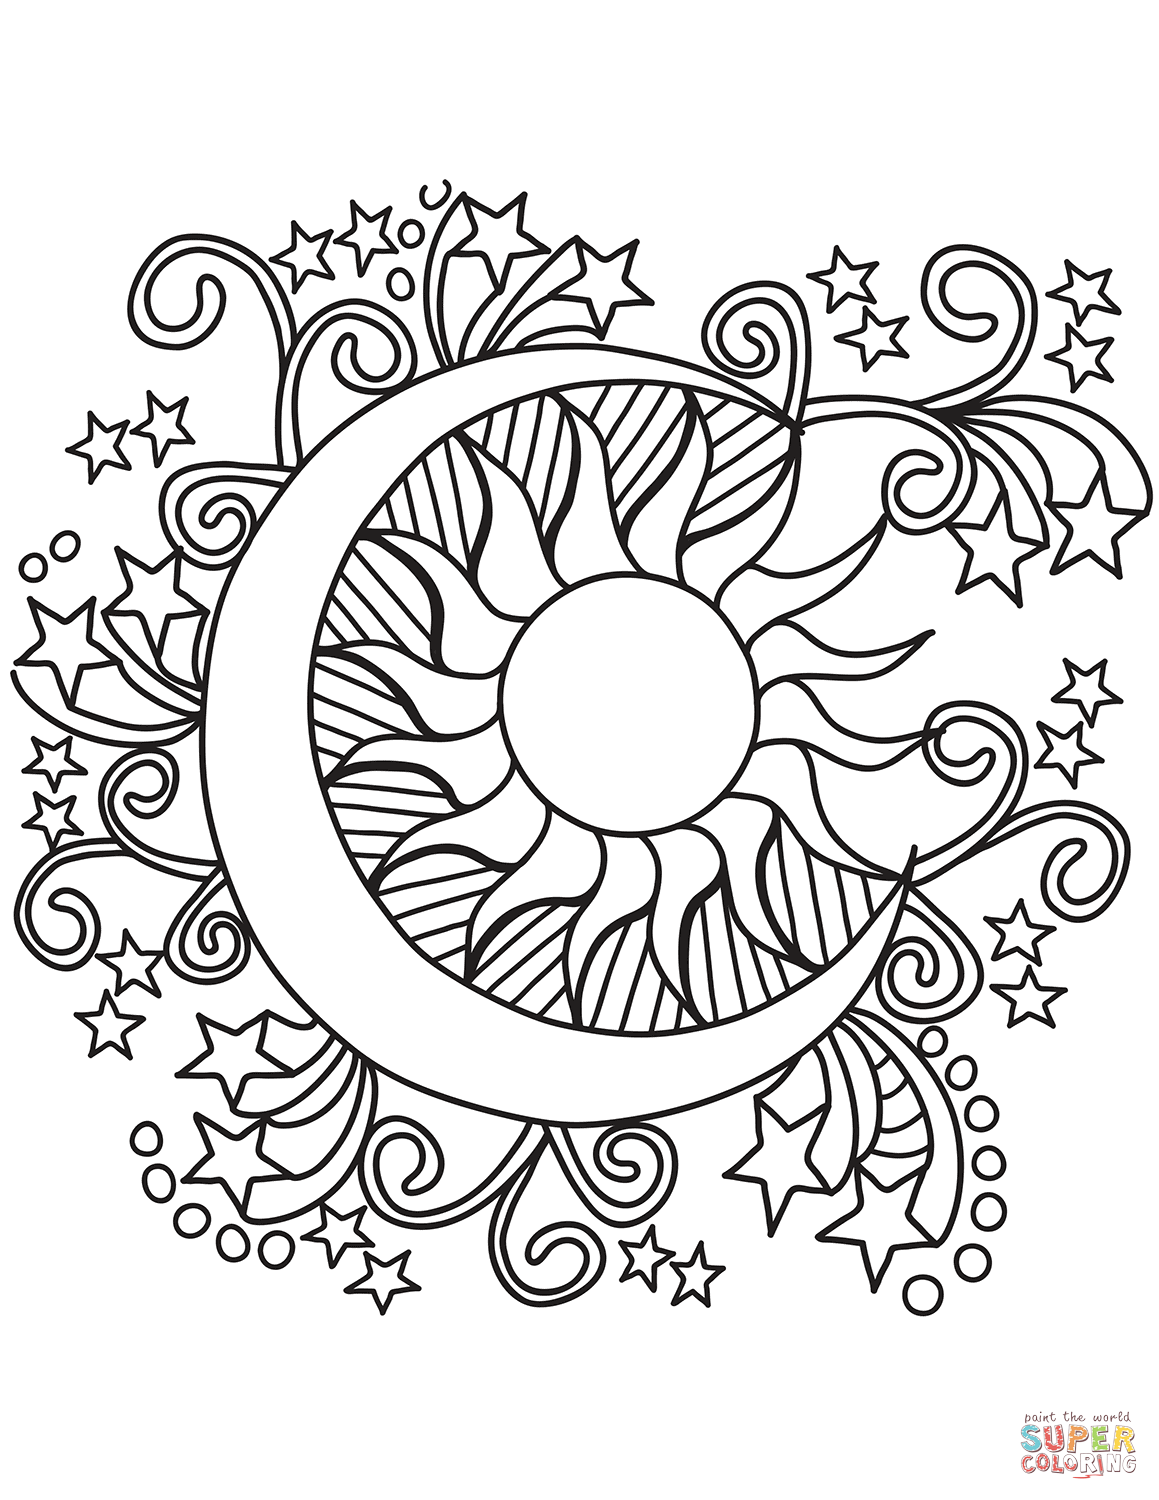 Pop art sun moon and stars coloring page free printable coloring pages